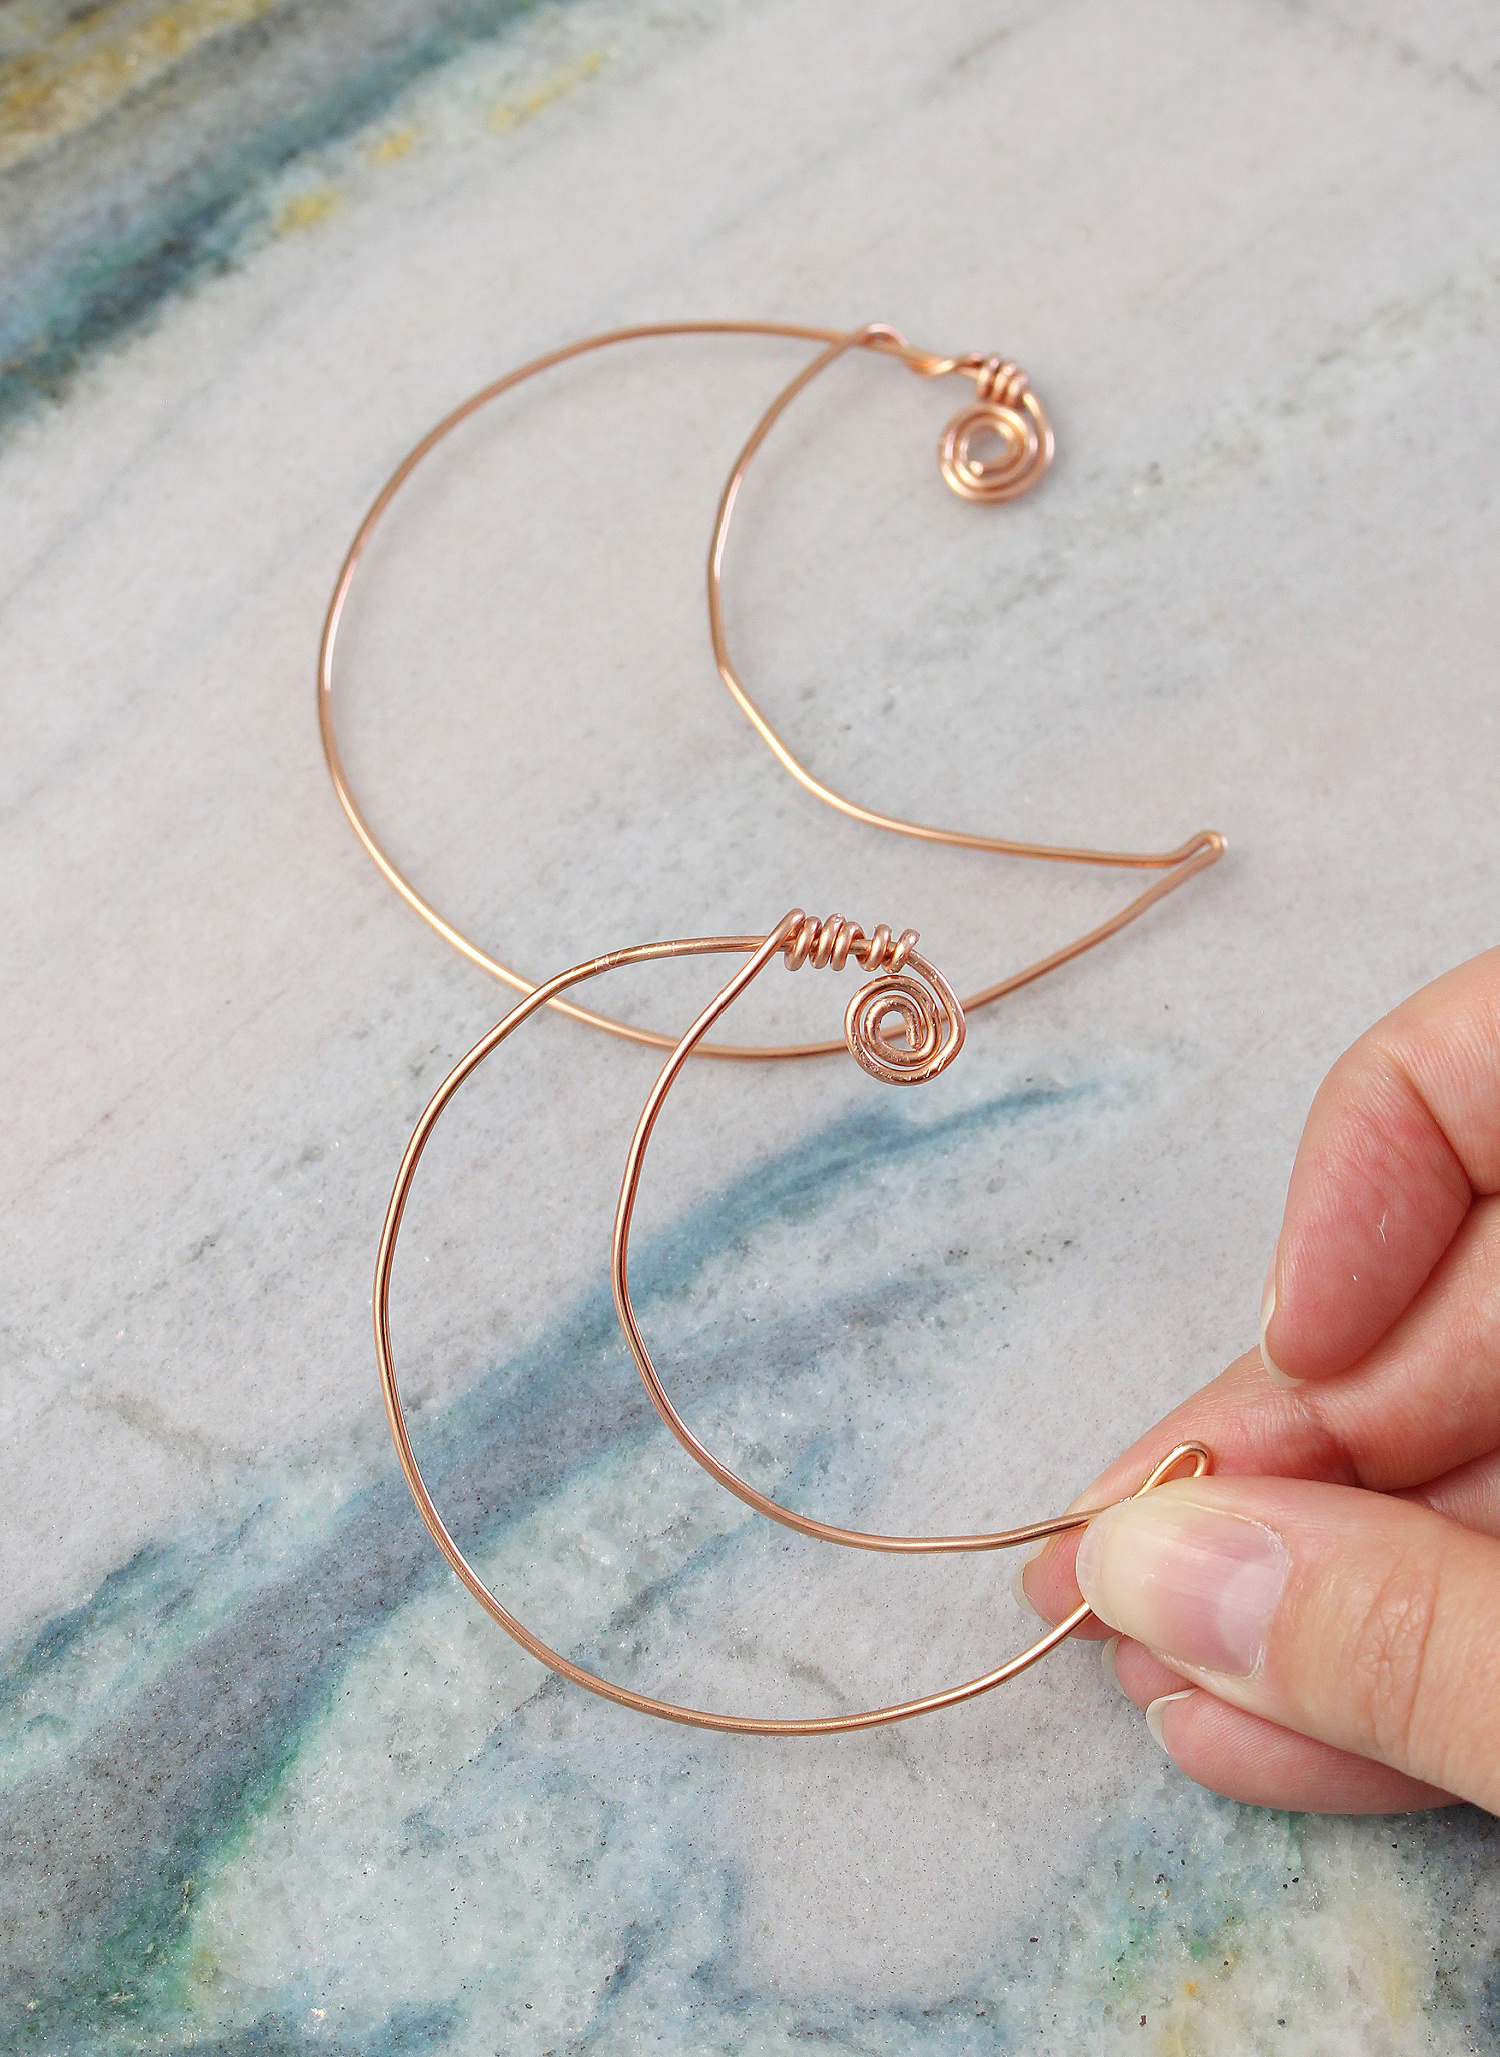 How to Make a Wire Crescent Moon Shape